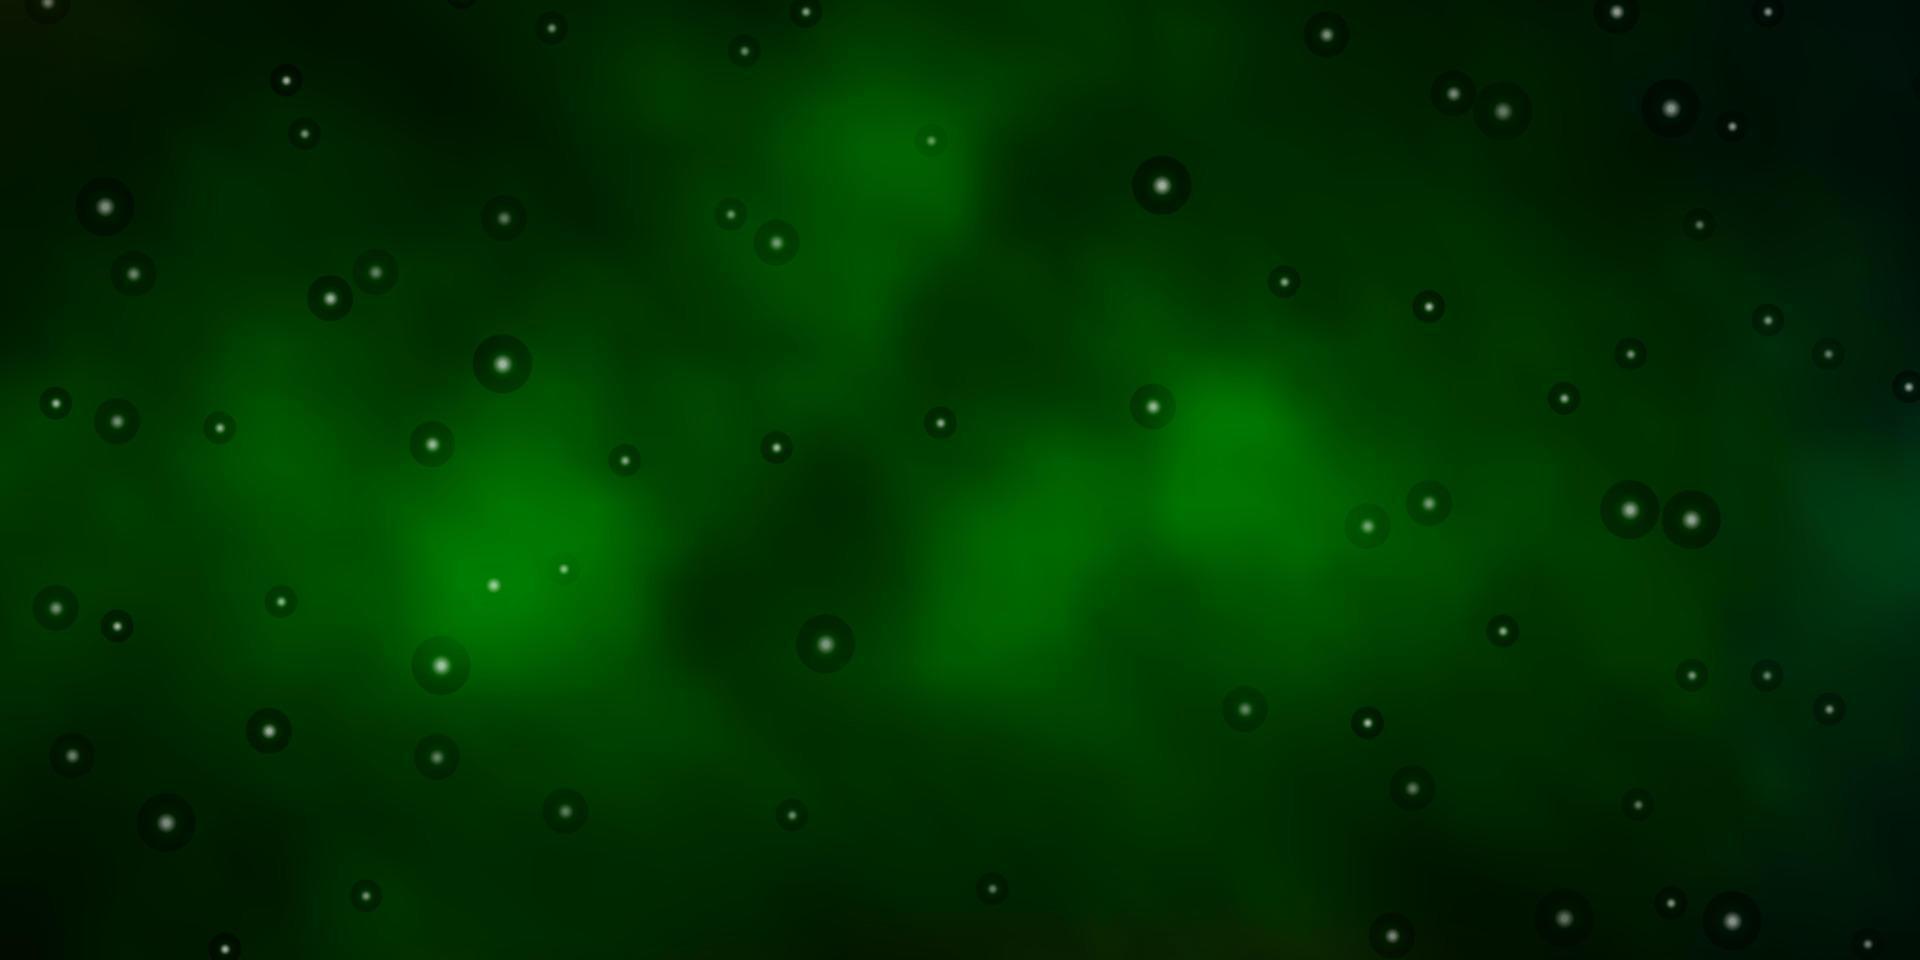 Dark Green, Red vector texture with beautiful stars.